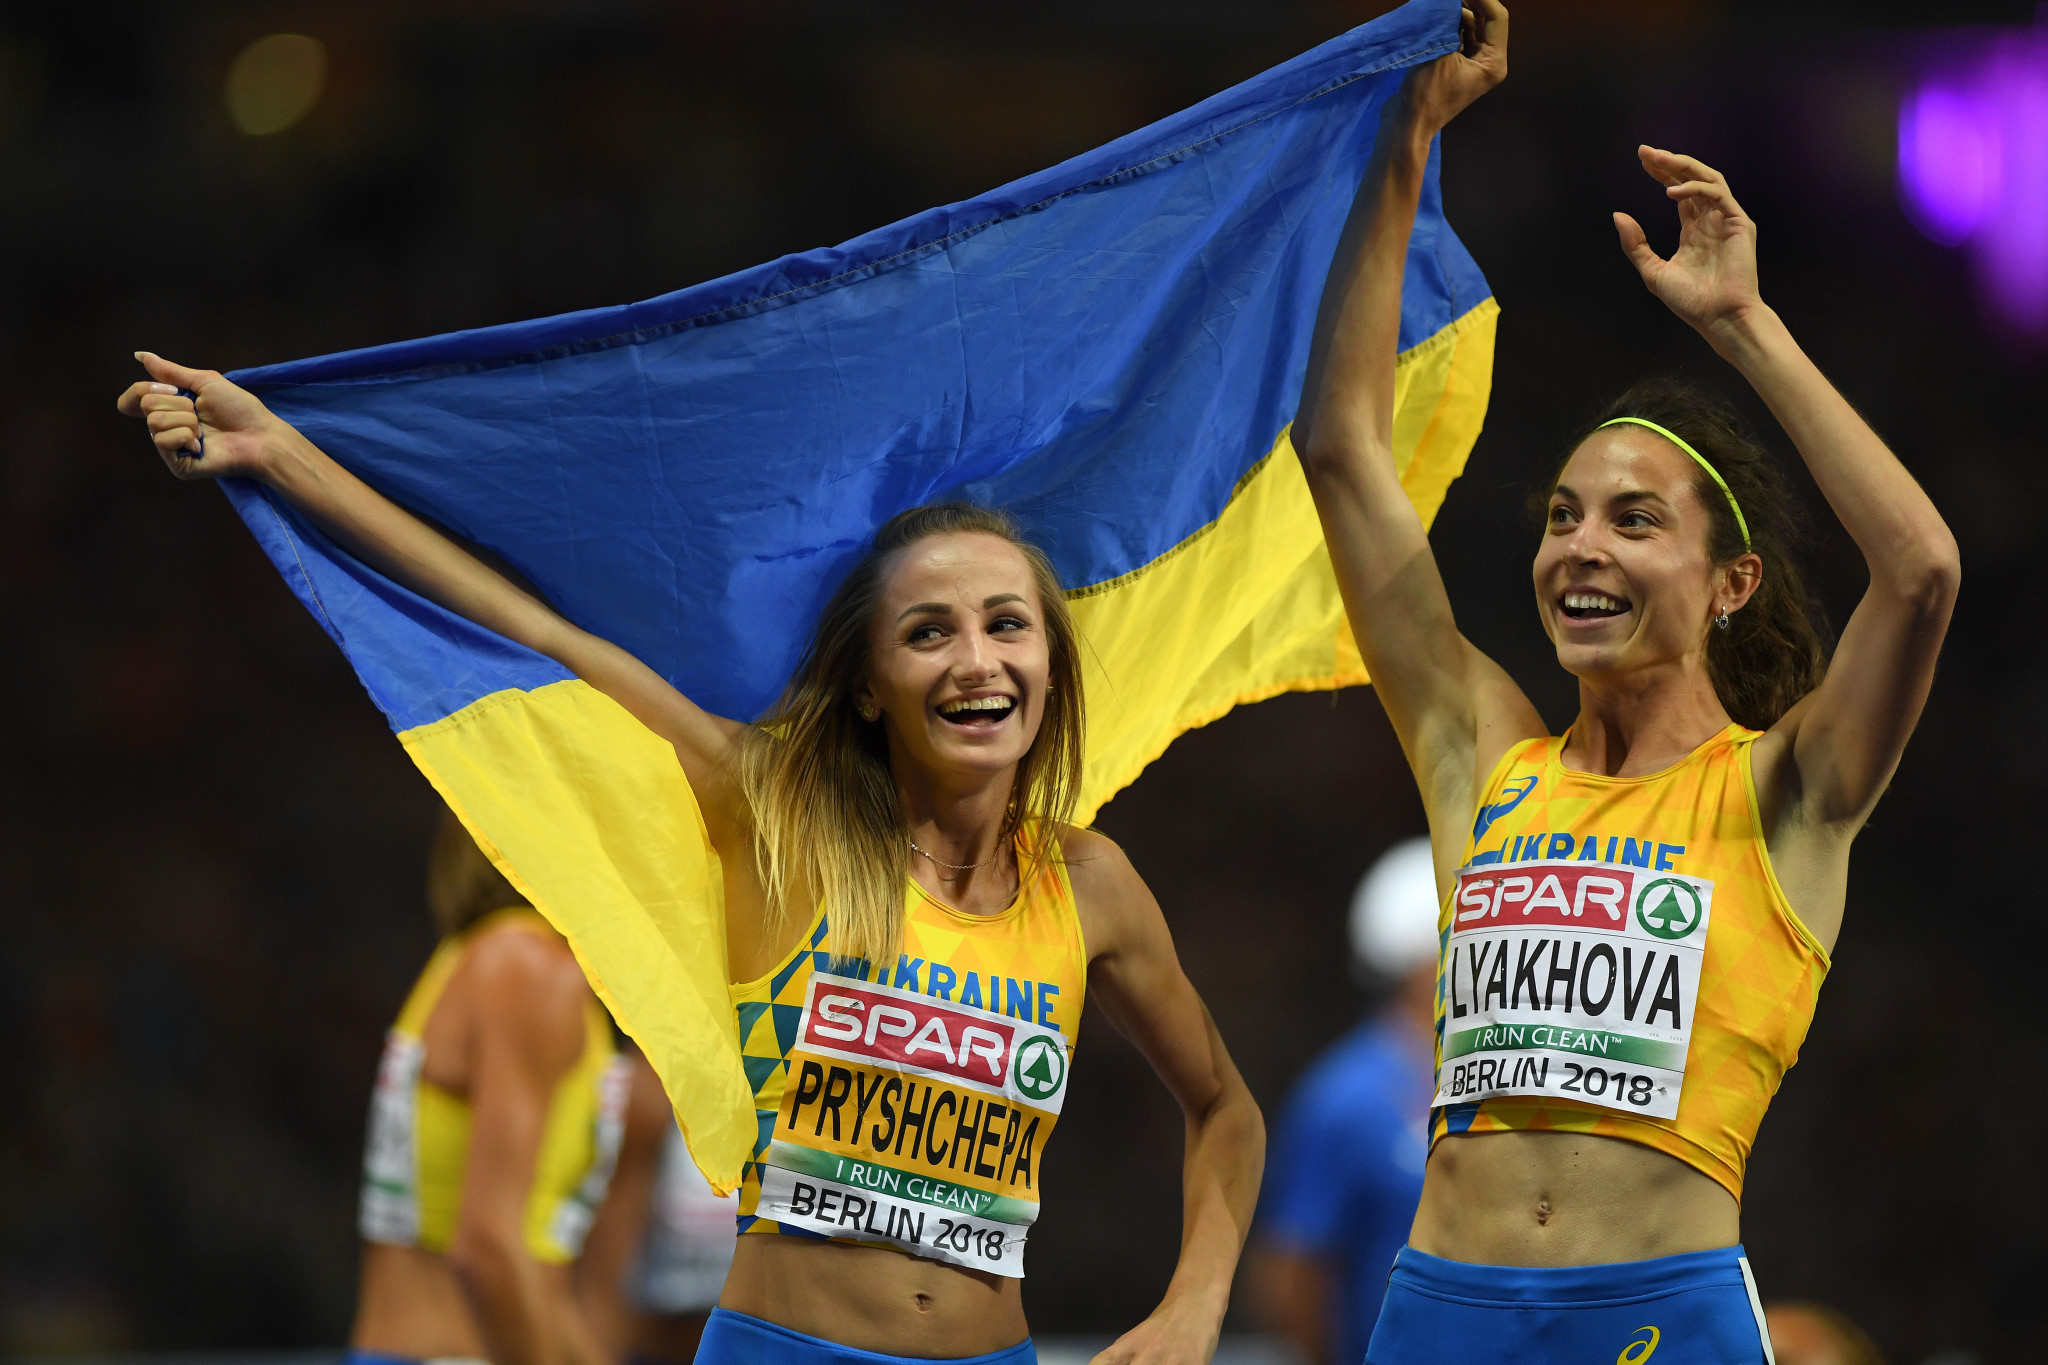 The deal is designed to promote improved medical care for Ukrainian athletes ©Getty Images